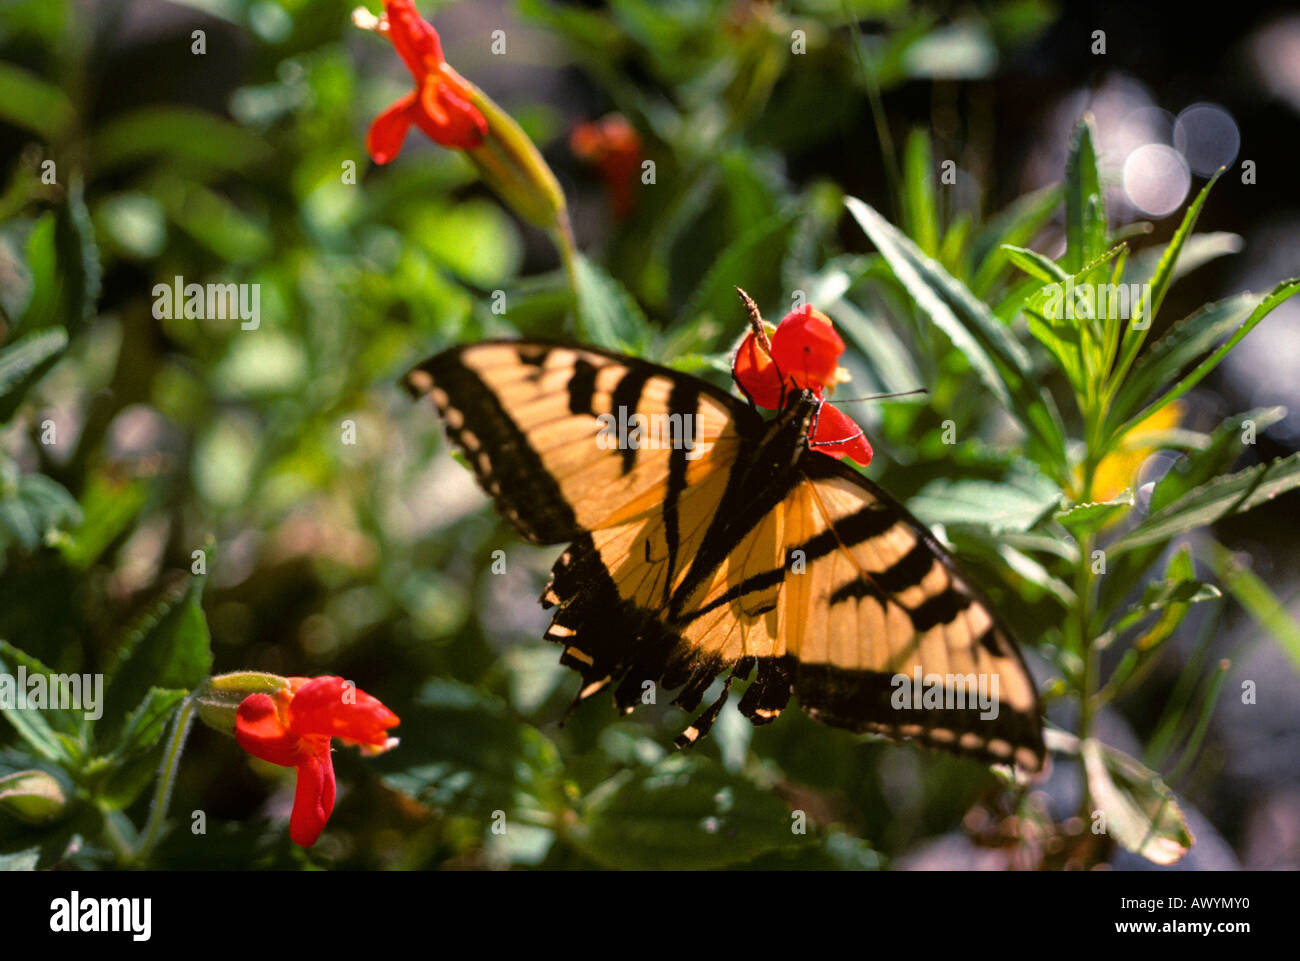 Butterfly on red flower. Scarlet monkeyflower or Mimulus Cardinalis. Two tailed tiger swallowtail butterfly Stock Photo